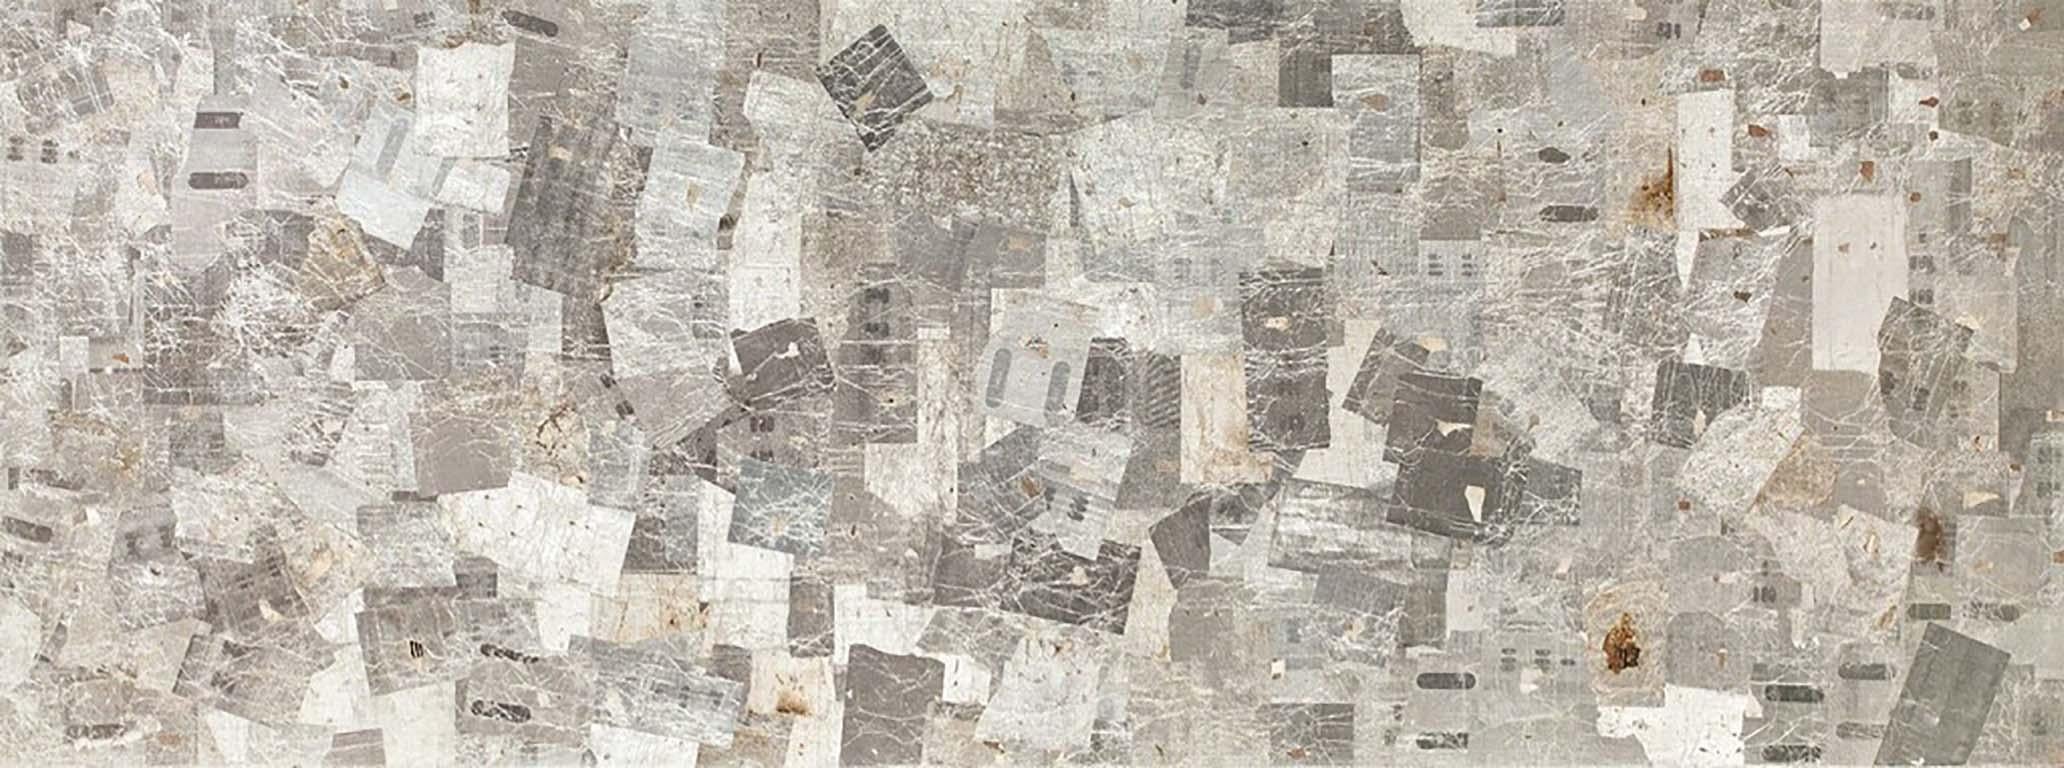 Robert Larson Abstract Painting - Silver Bar, 2014, Discarded Tobacco Foil, Linen, Geometric Abstraction